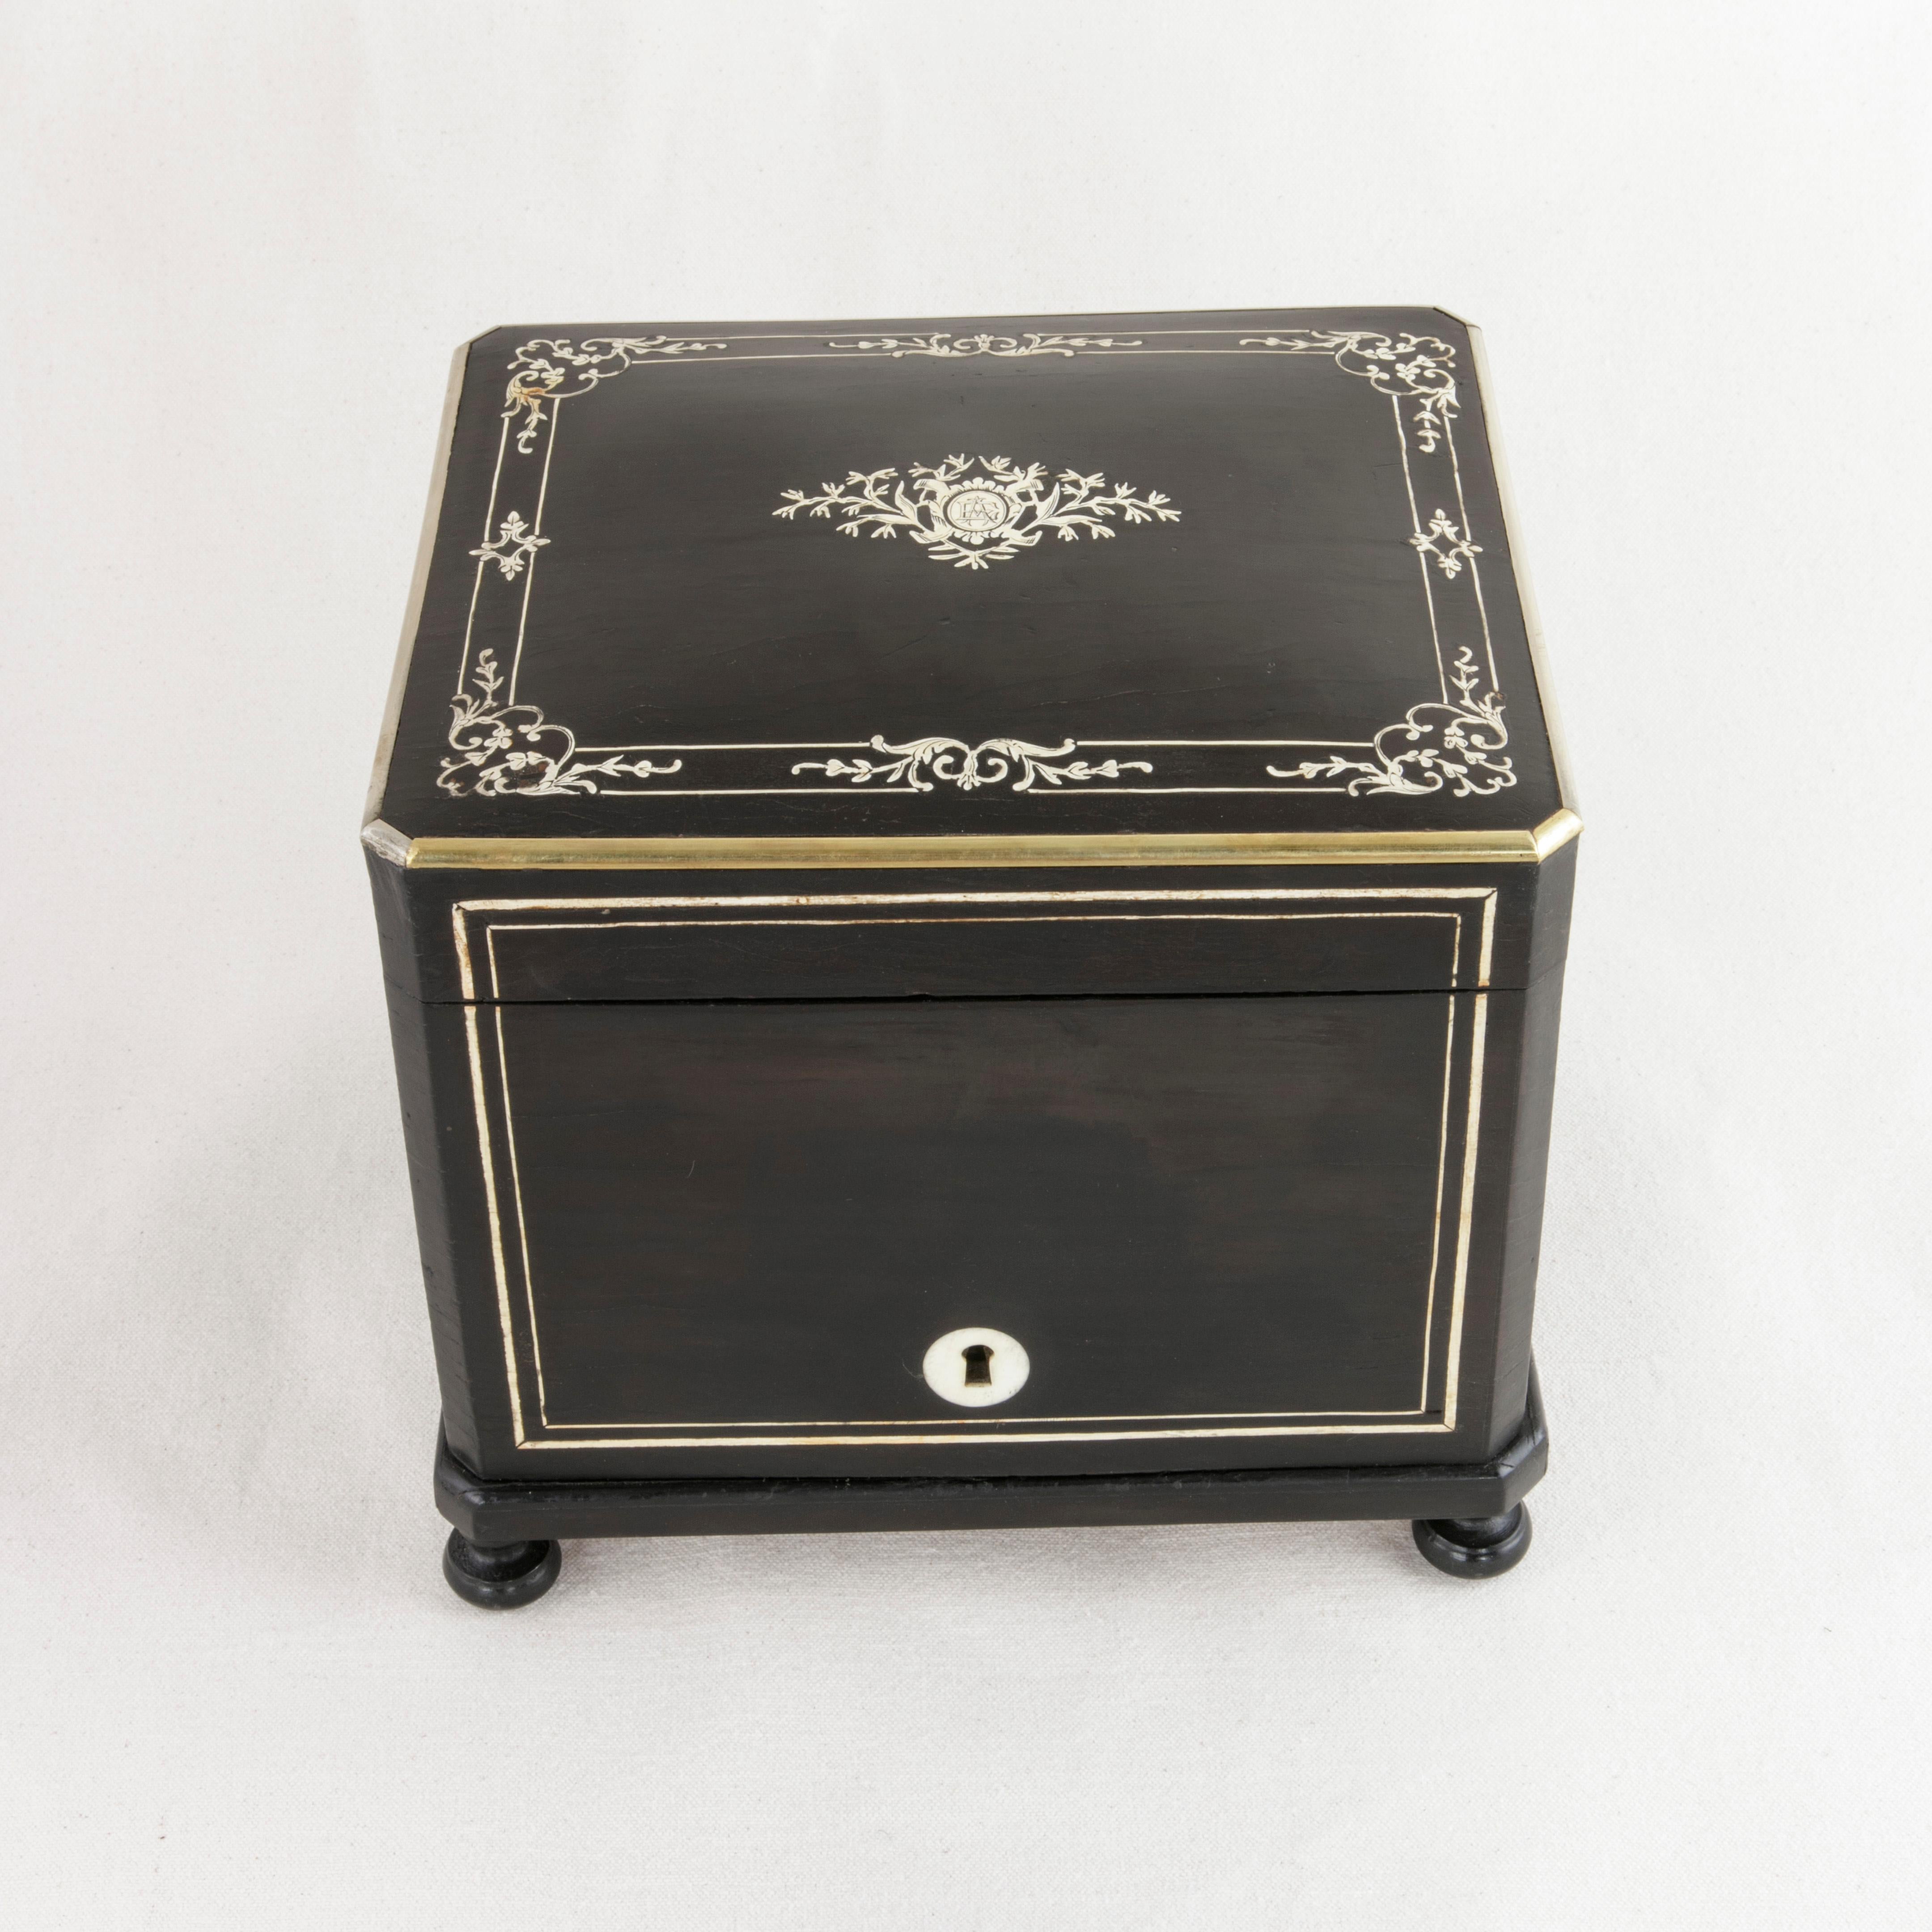 This mid-19th century French Napoleon III period black lacquer Cave a Cigares, or cigar presentation box features a lid of inlaid bone with a central cartouche flanked by leaves and a monogrammed EA. Finely inlaid lines of bone create an inset